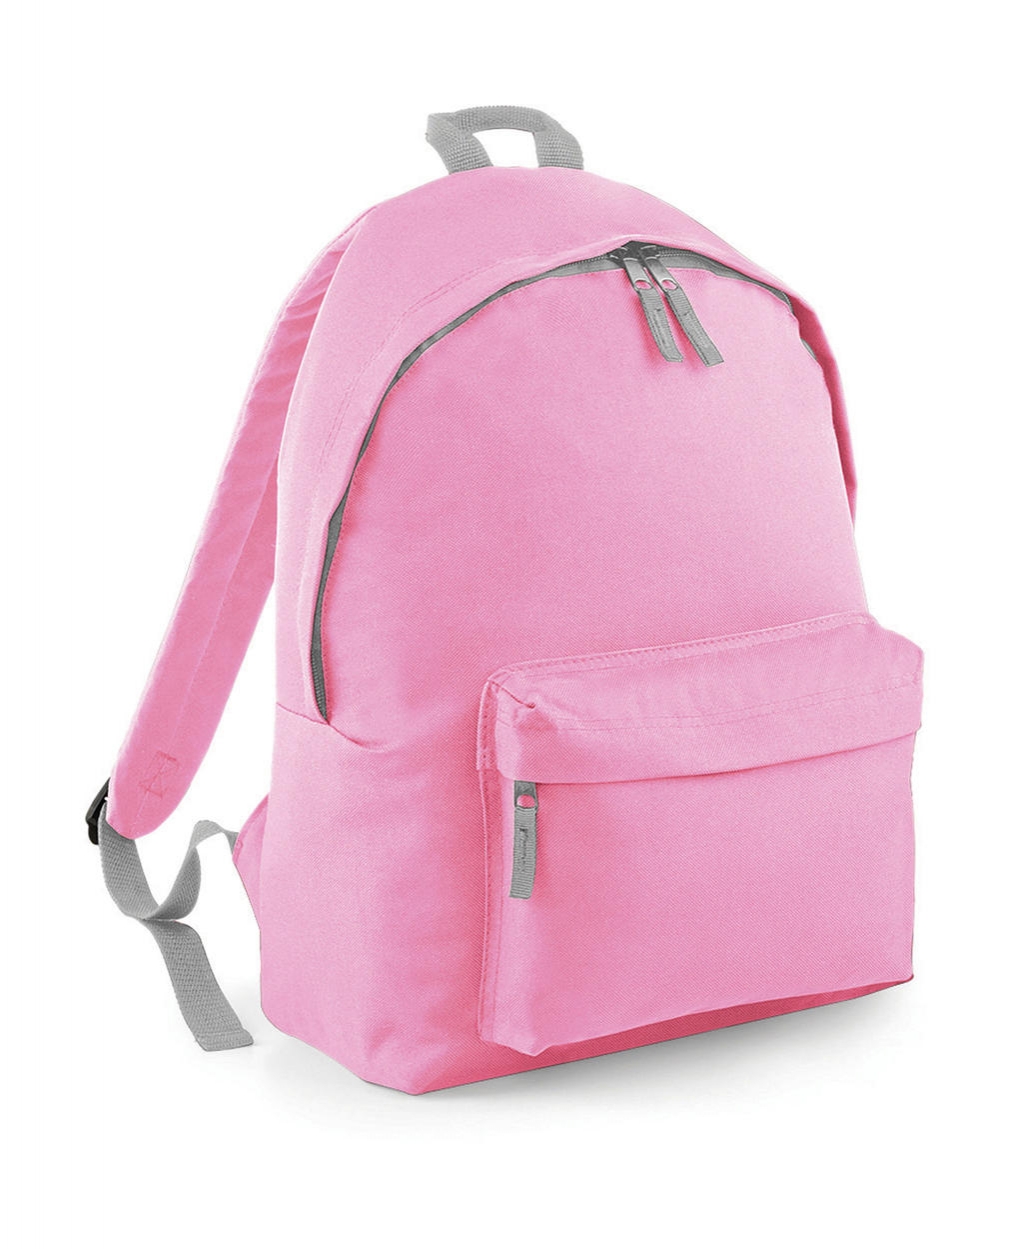 Junior Fashion Backpack Classic Pink/Light Grey Rose